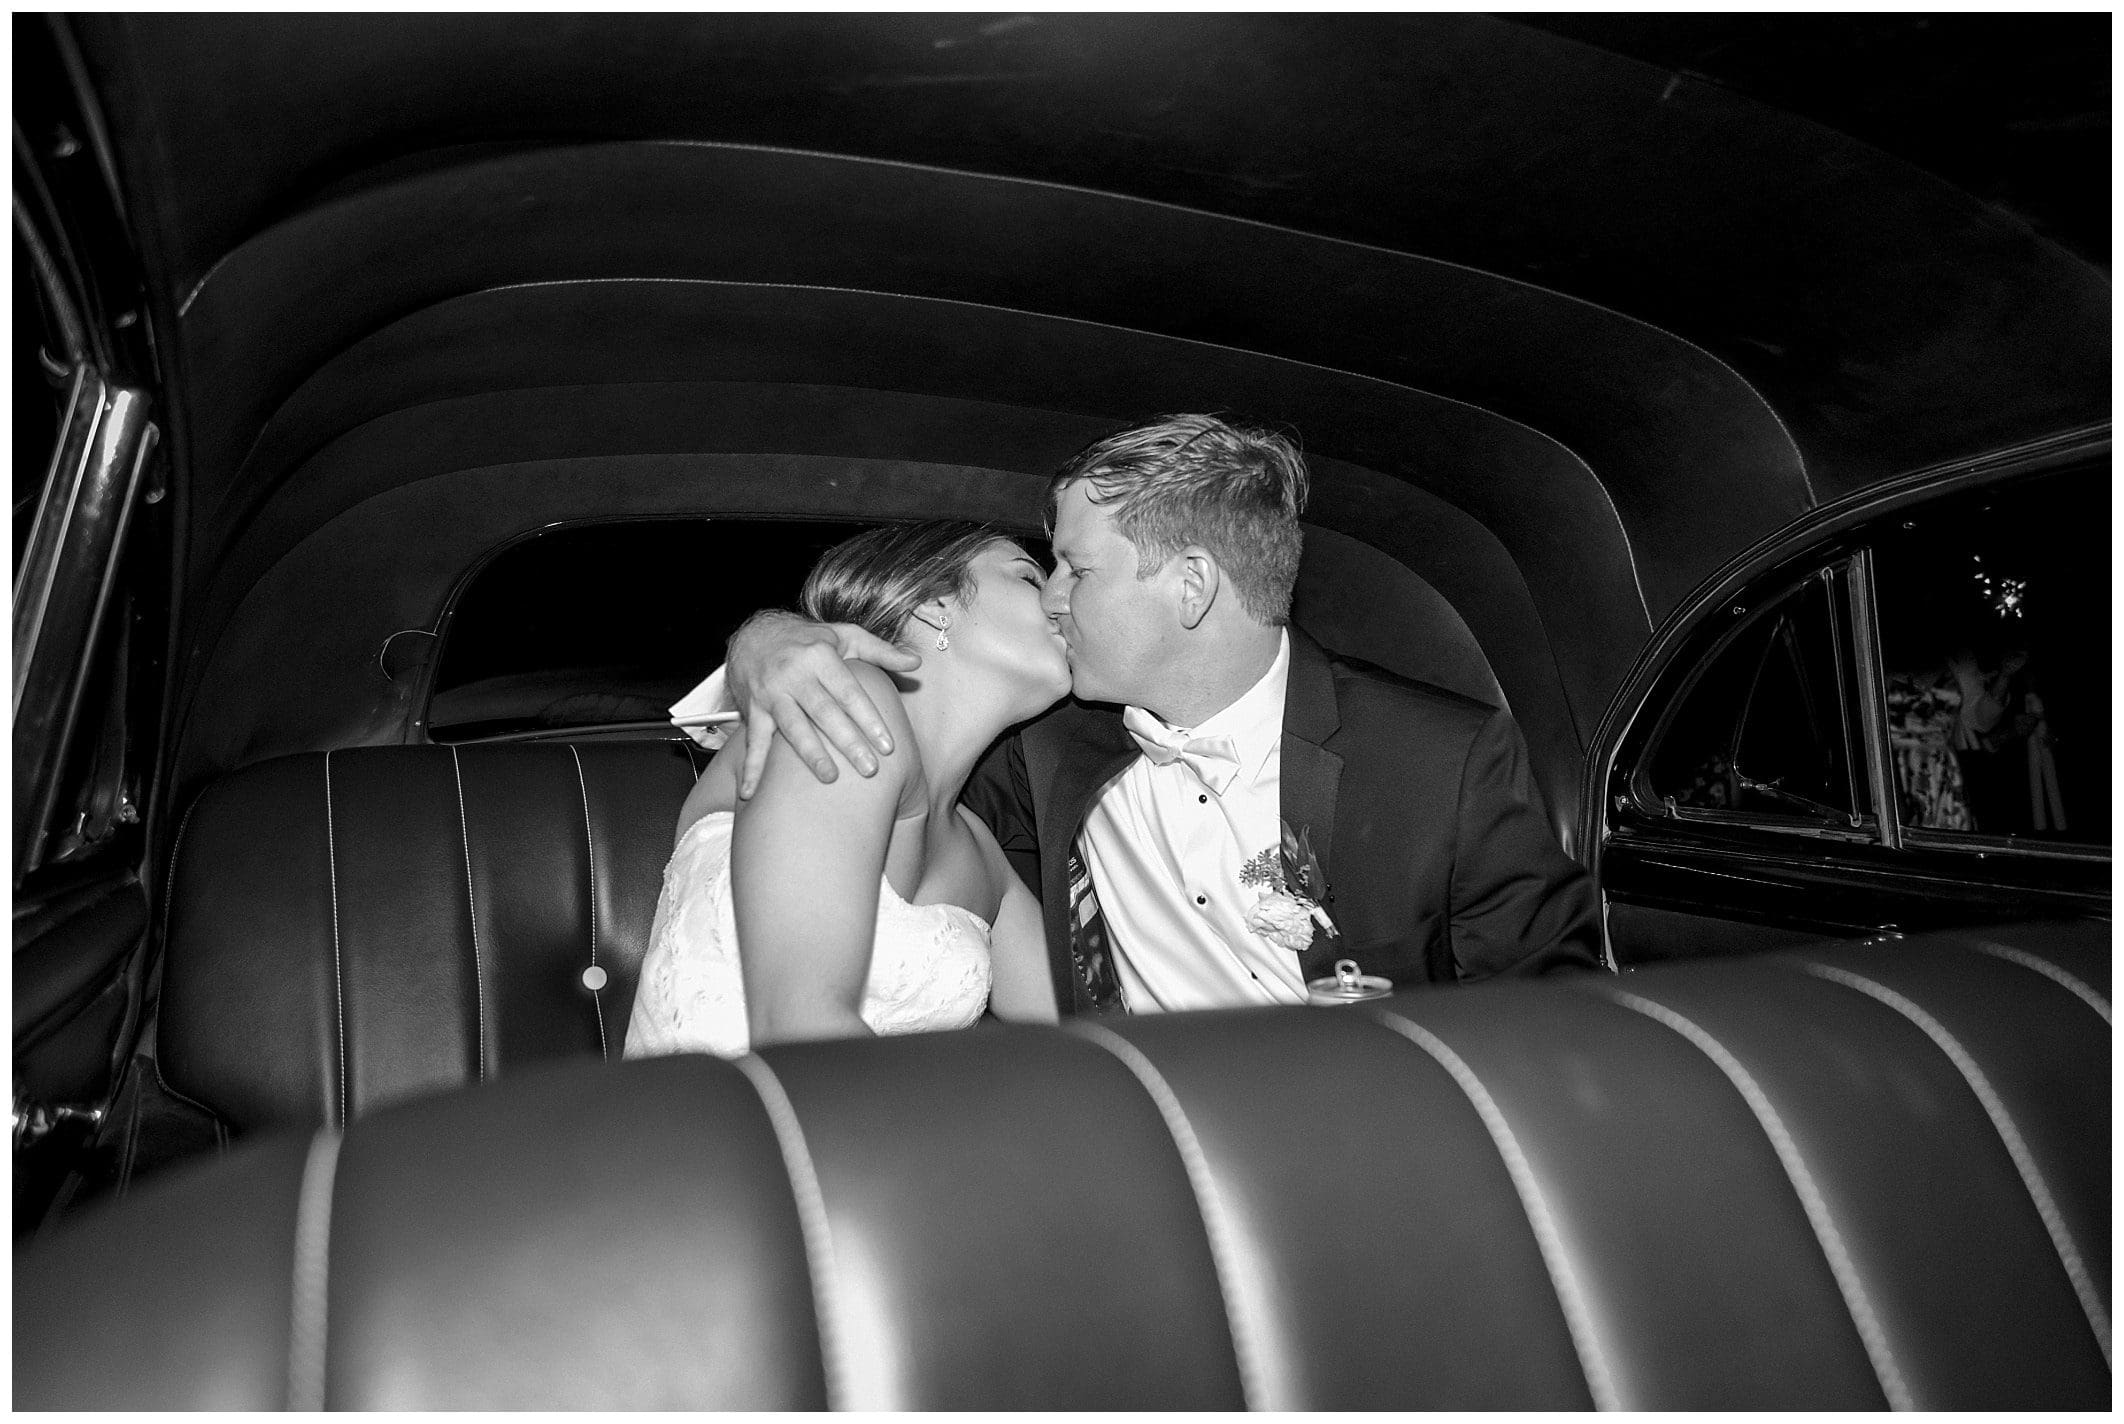 A bride and groom kiss in the back seat of a vintage car.